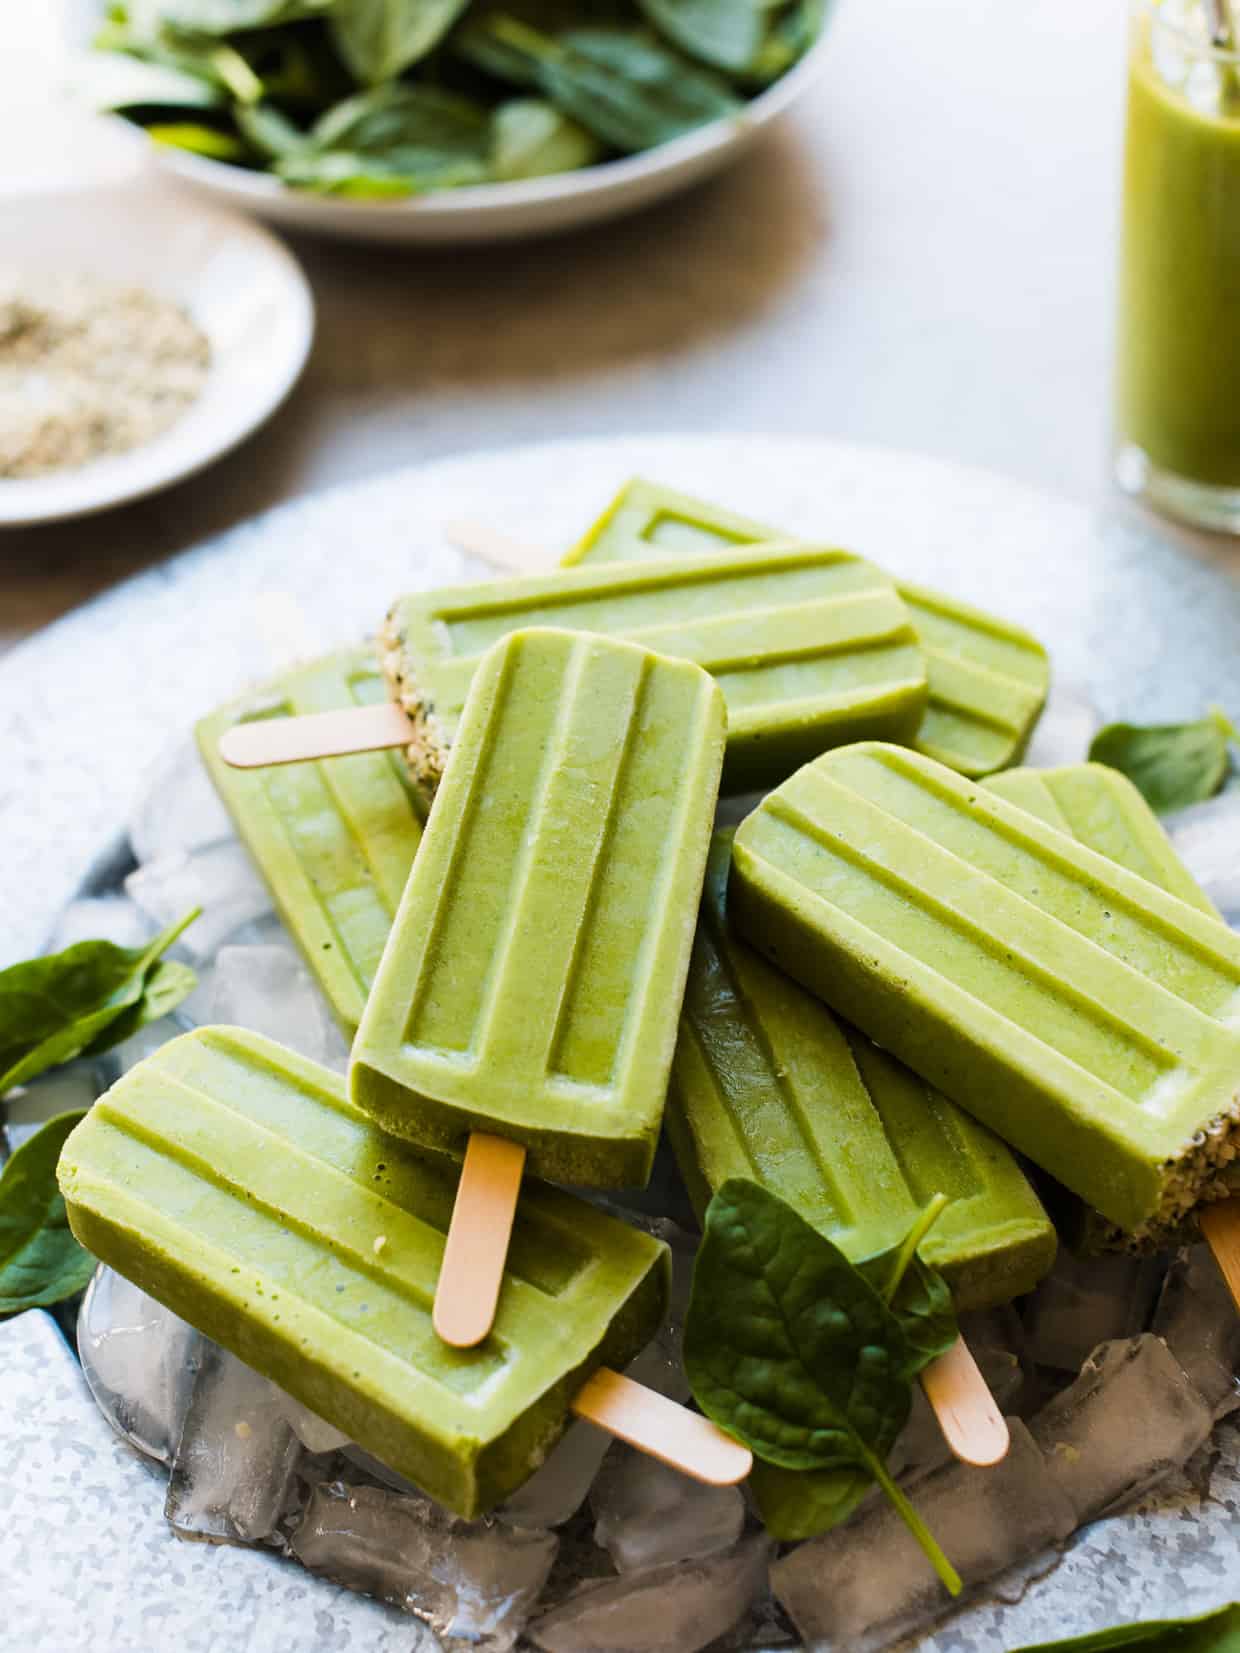 Green Smoothie Popsicles on a platter with ice cubes and fresh baby spinach leaves for garnish.